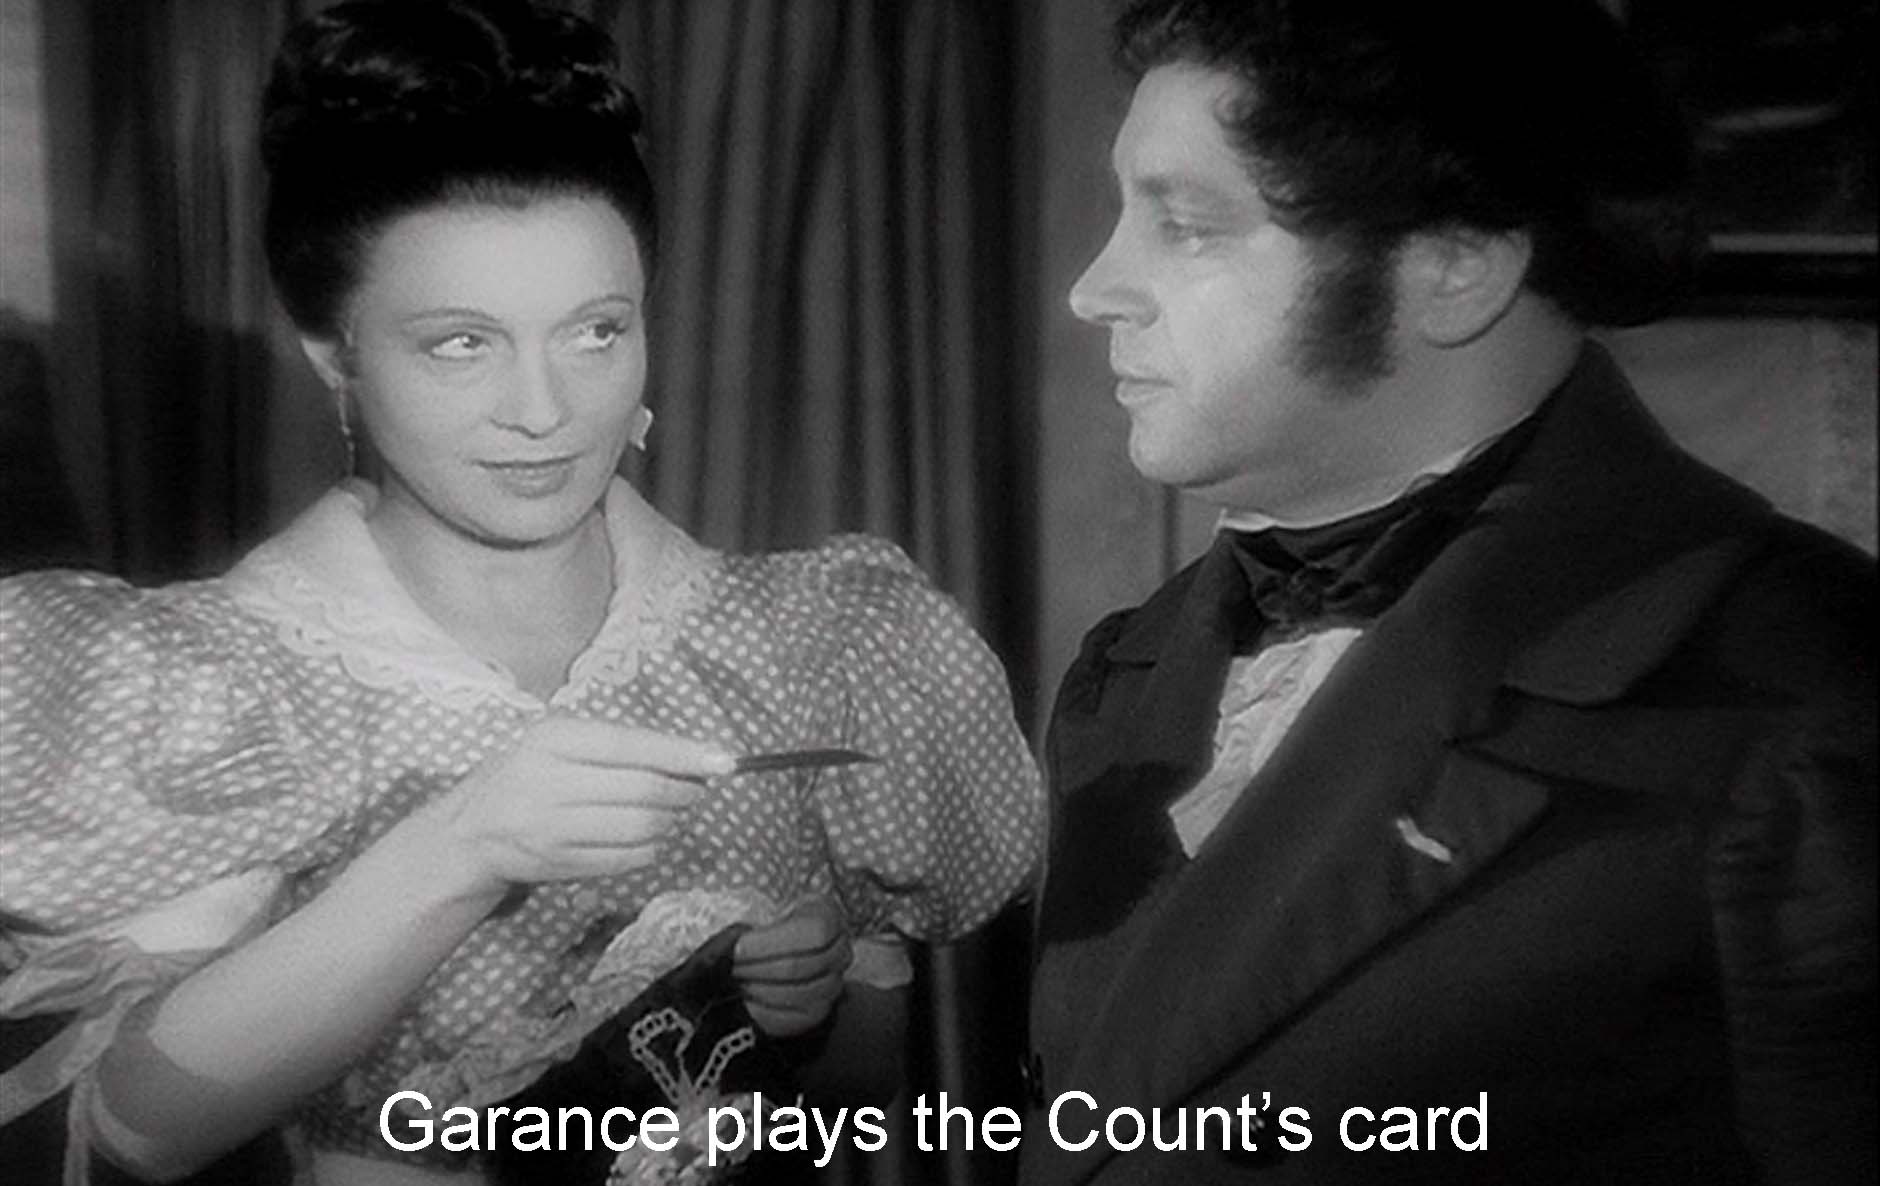 Garance counts on the Count